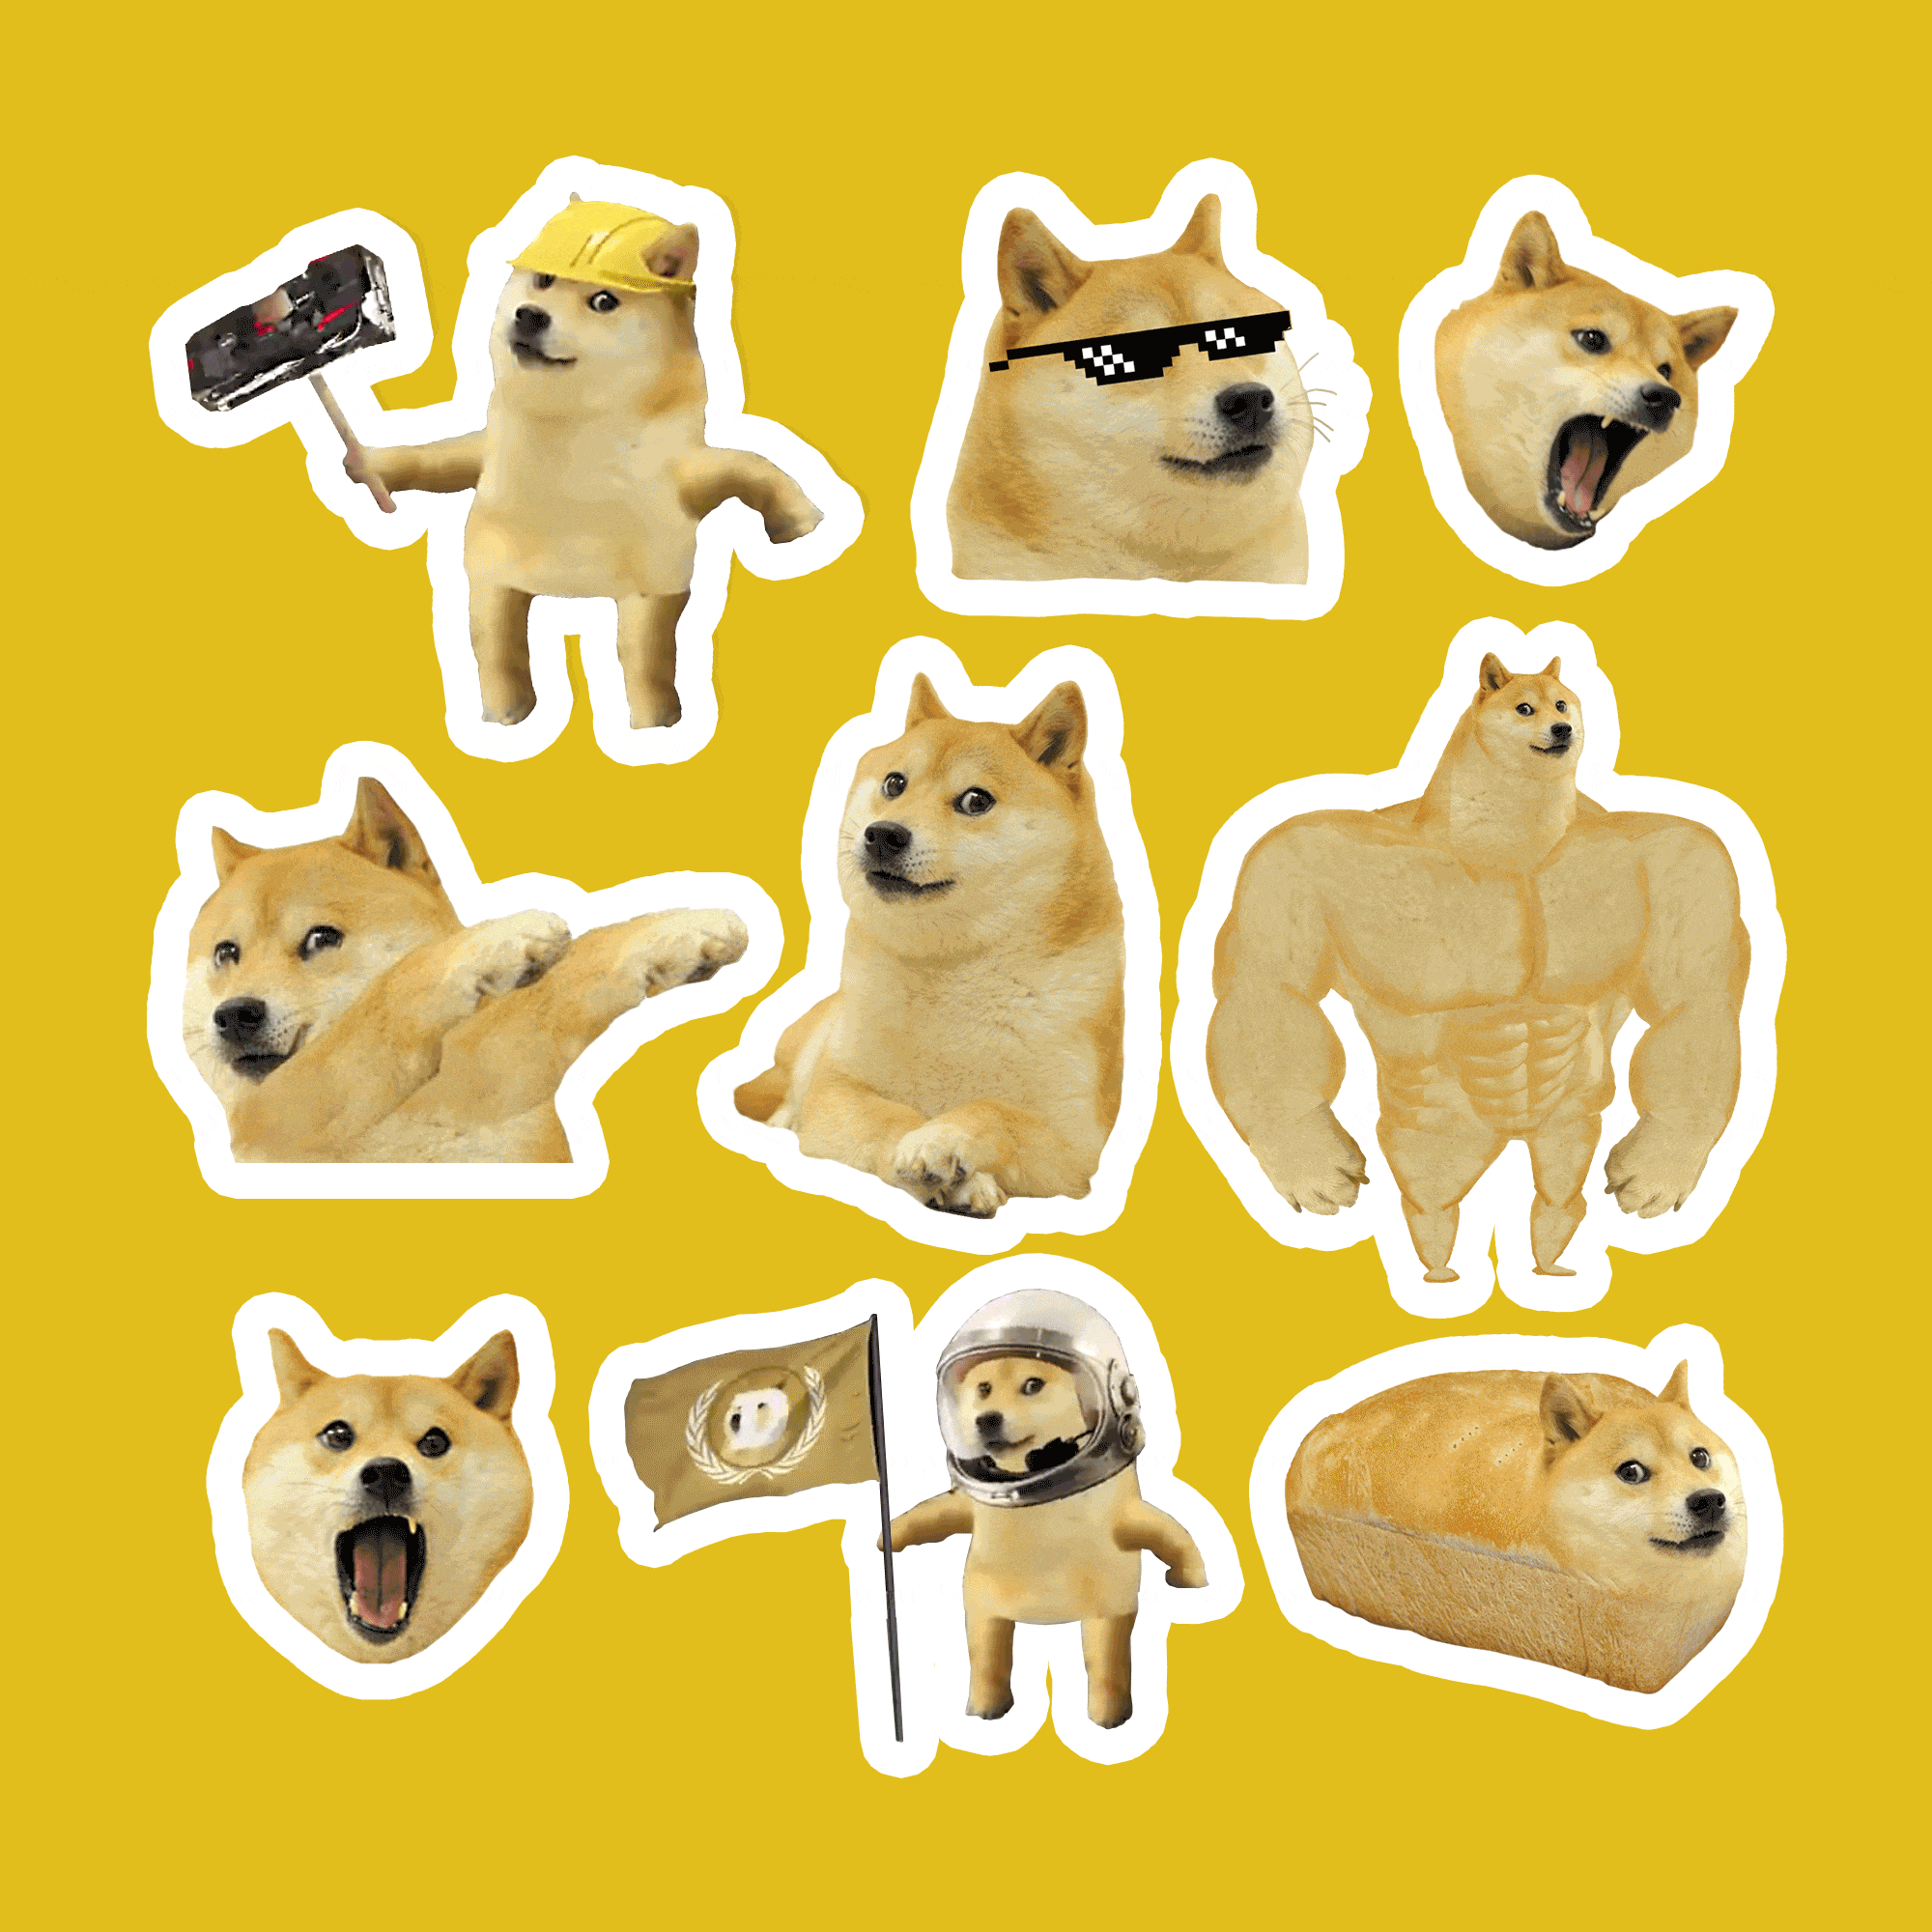 Doge Meme Stickers - Dogecoin Stickers